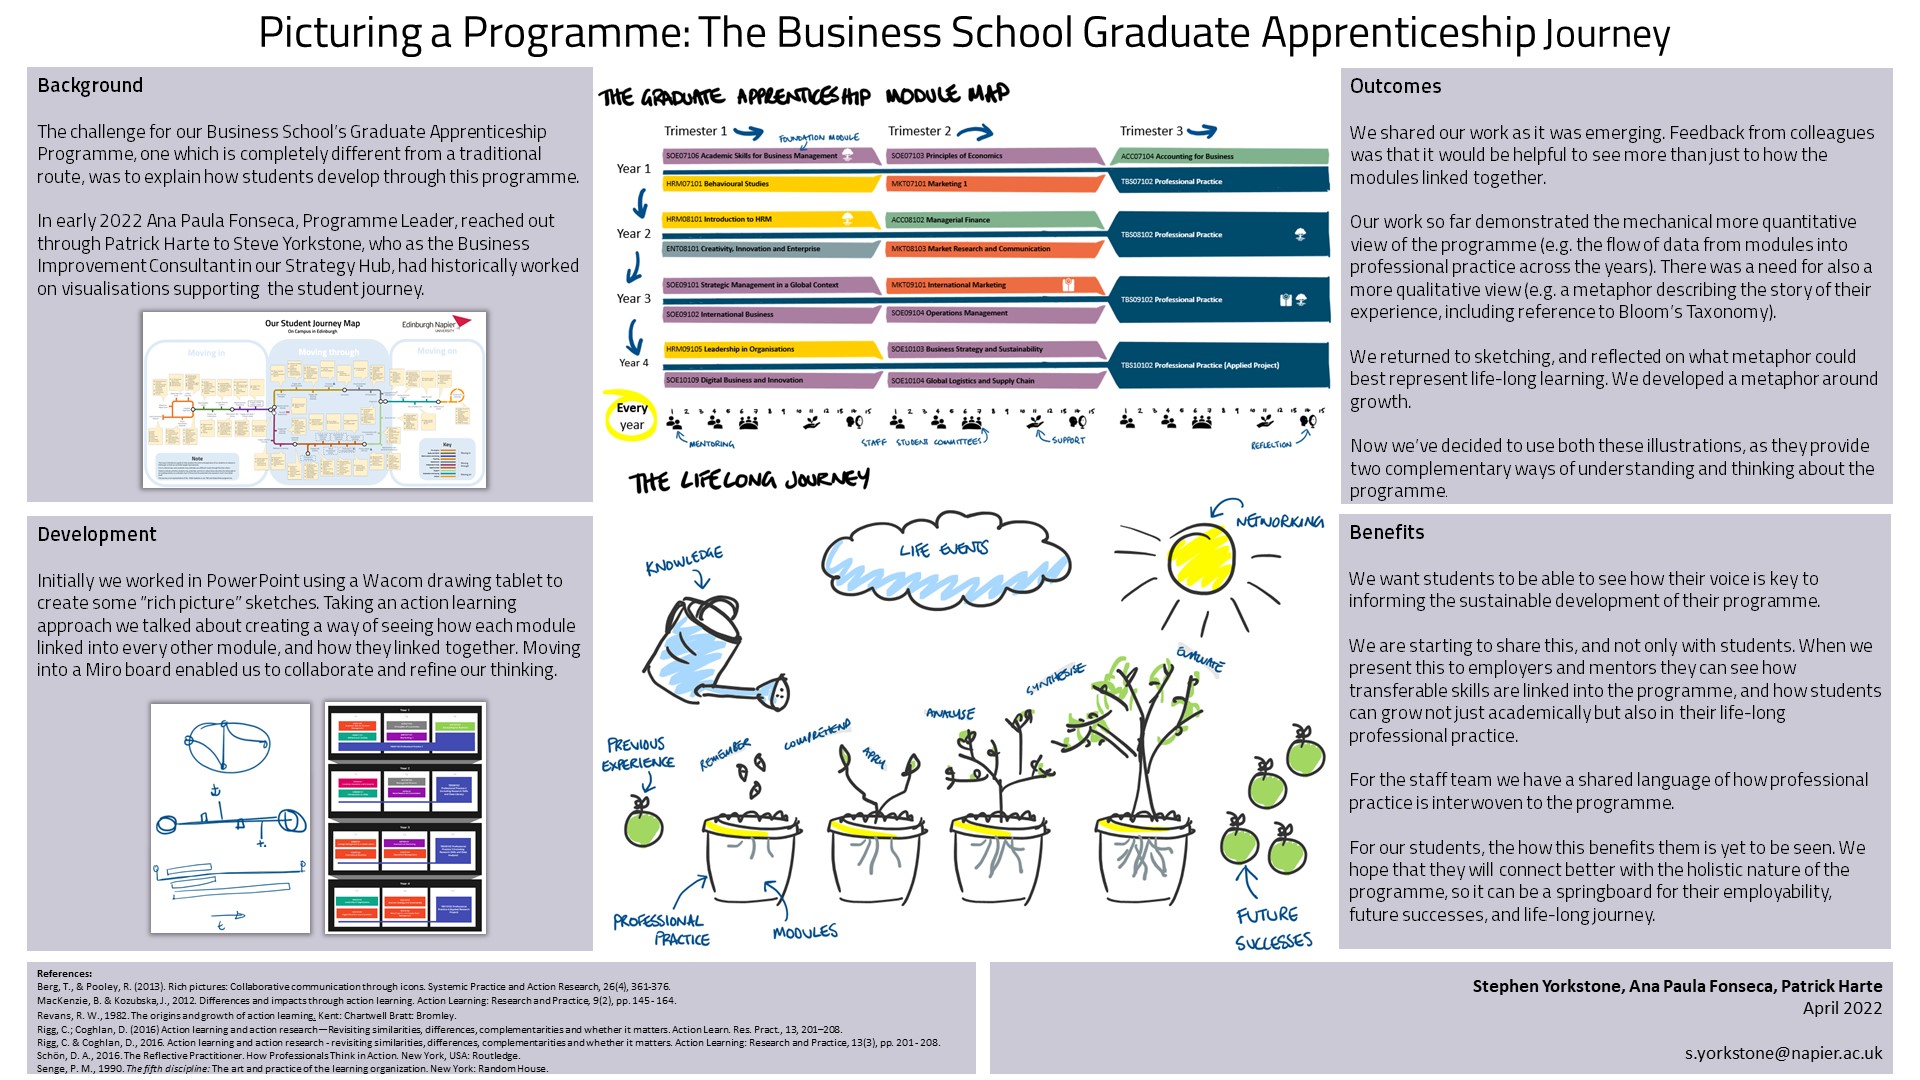 Picturing A Programme: The Business School Graduate Apprenticeship Journey